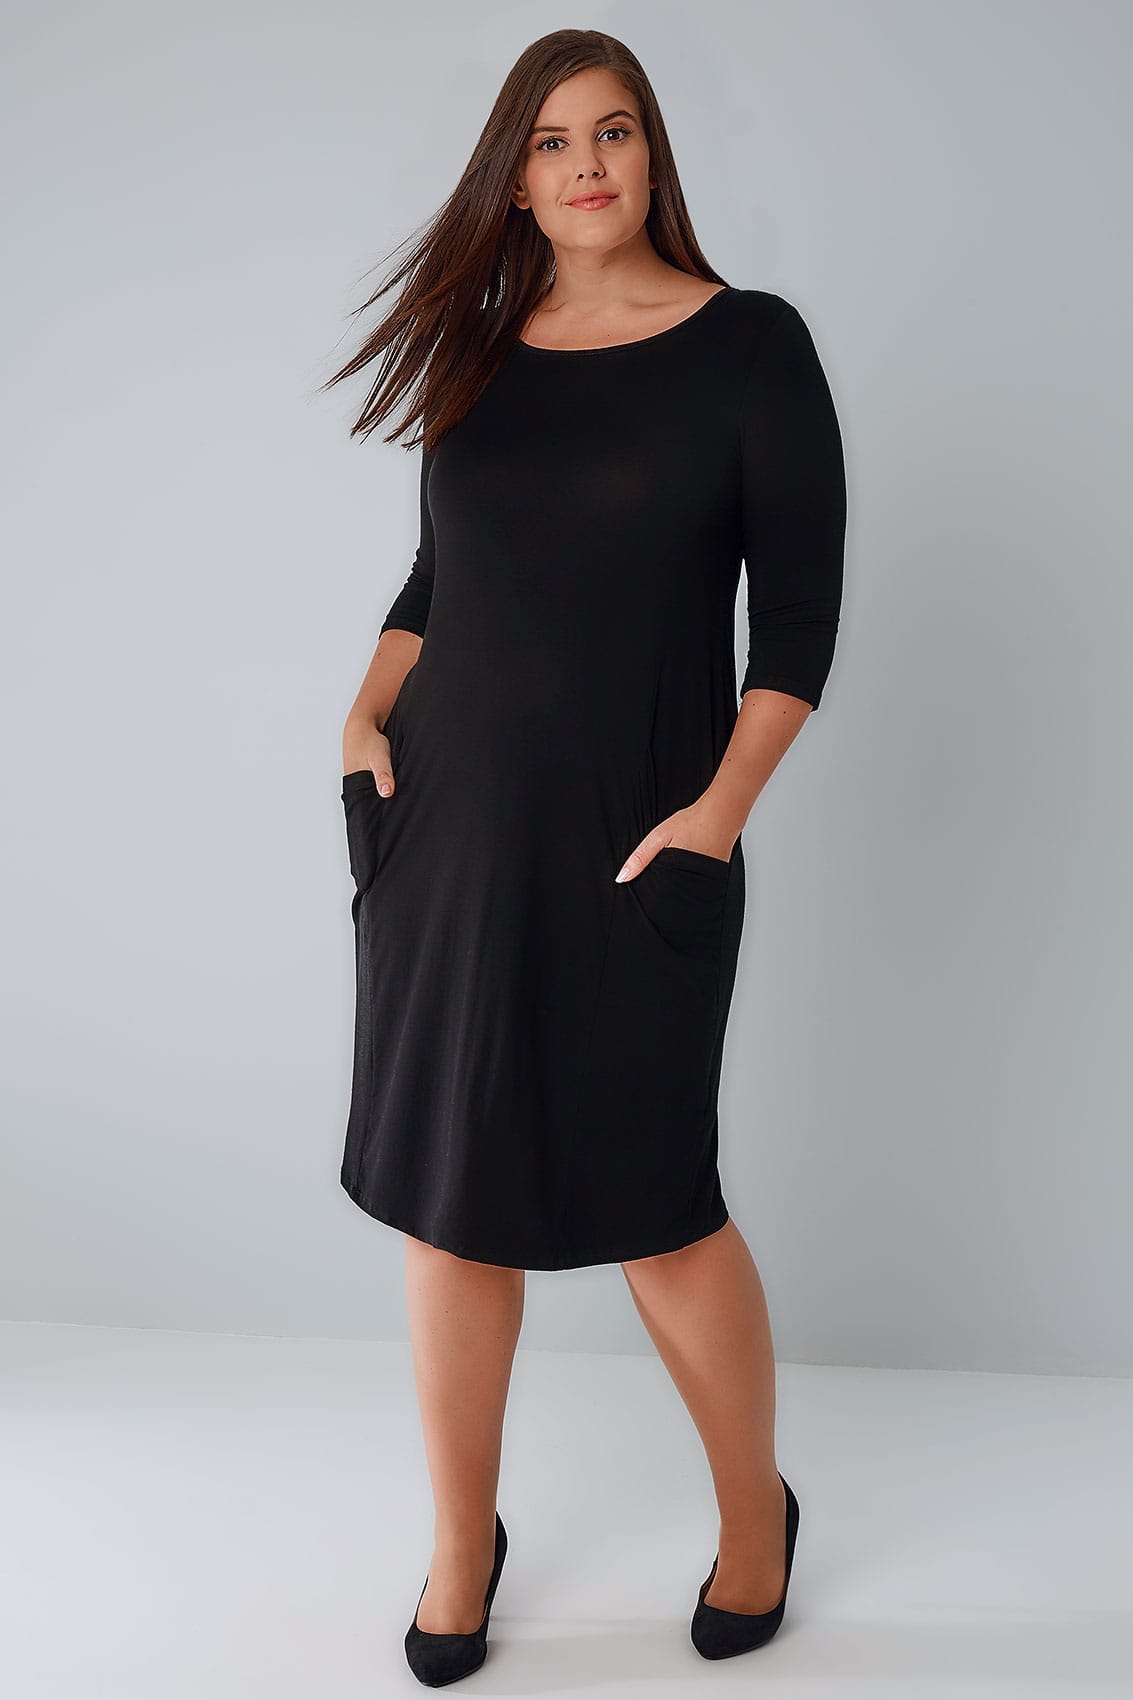 Black Jersey Dress With Drop Pockets & 3/4 Length Sleeves, Plus size 16 ...